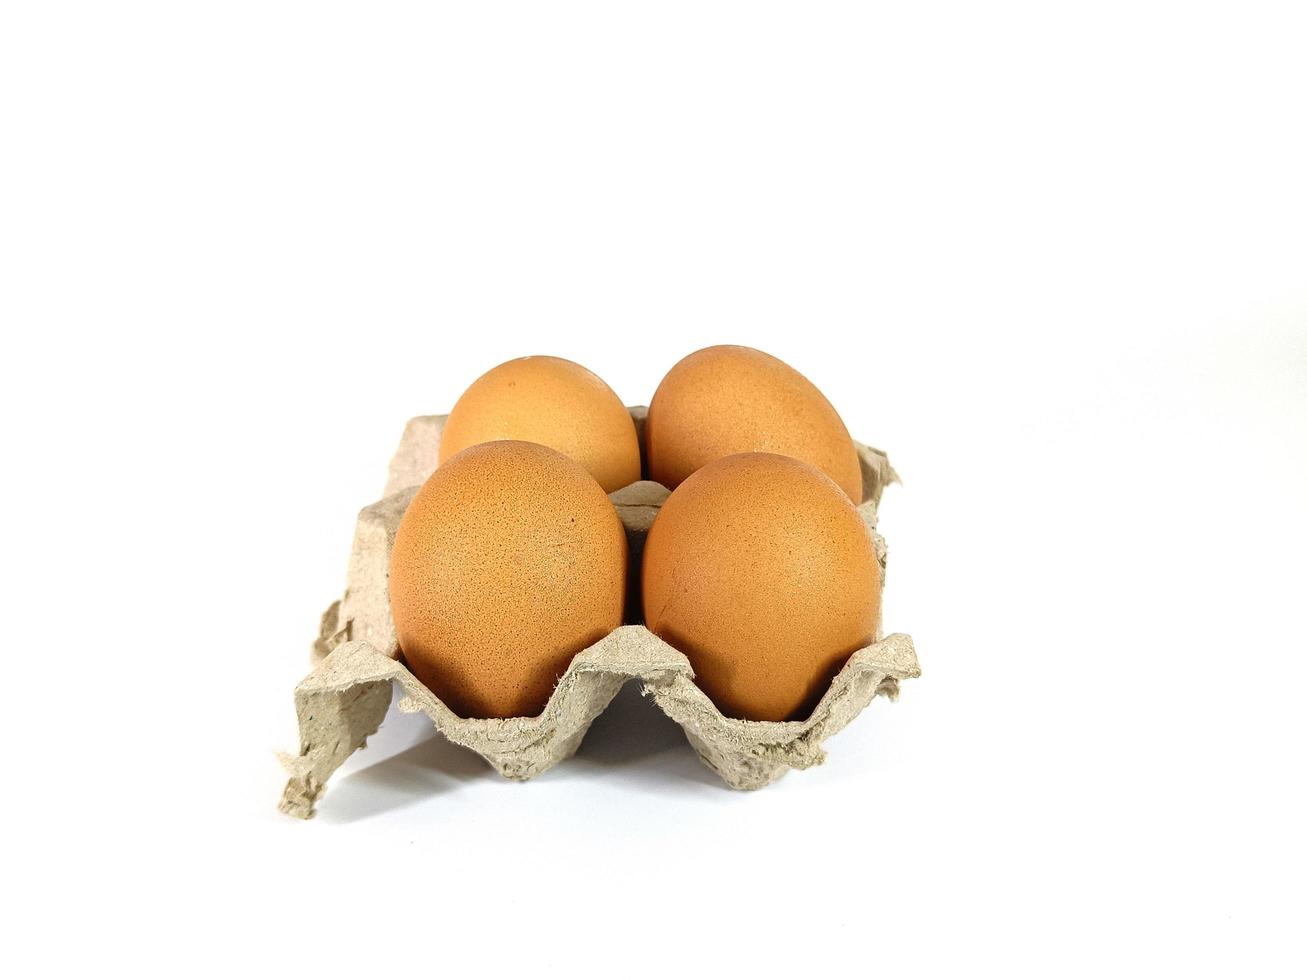 Eggs on recycled cardboard boxes on a white background photo